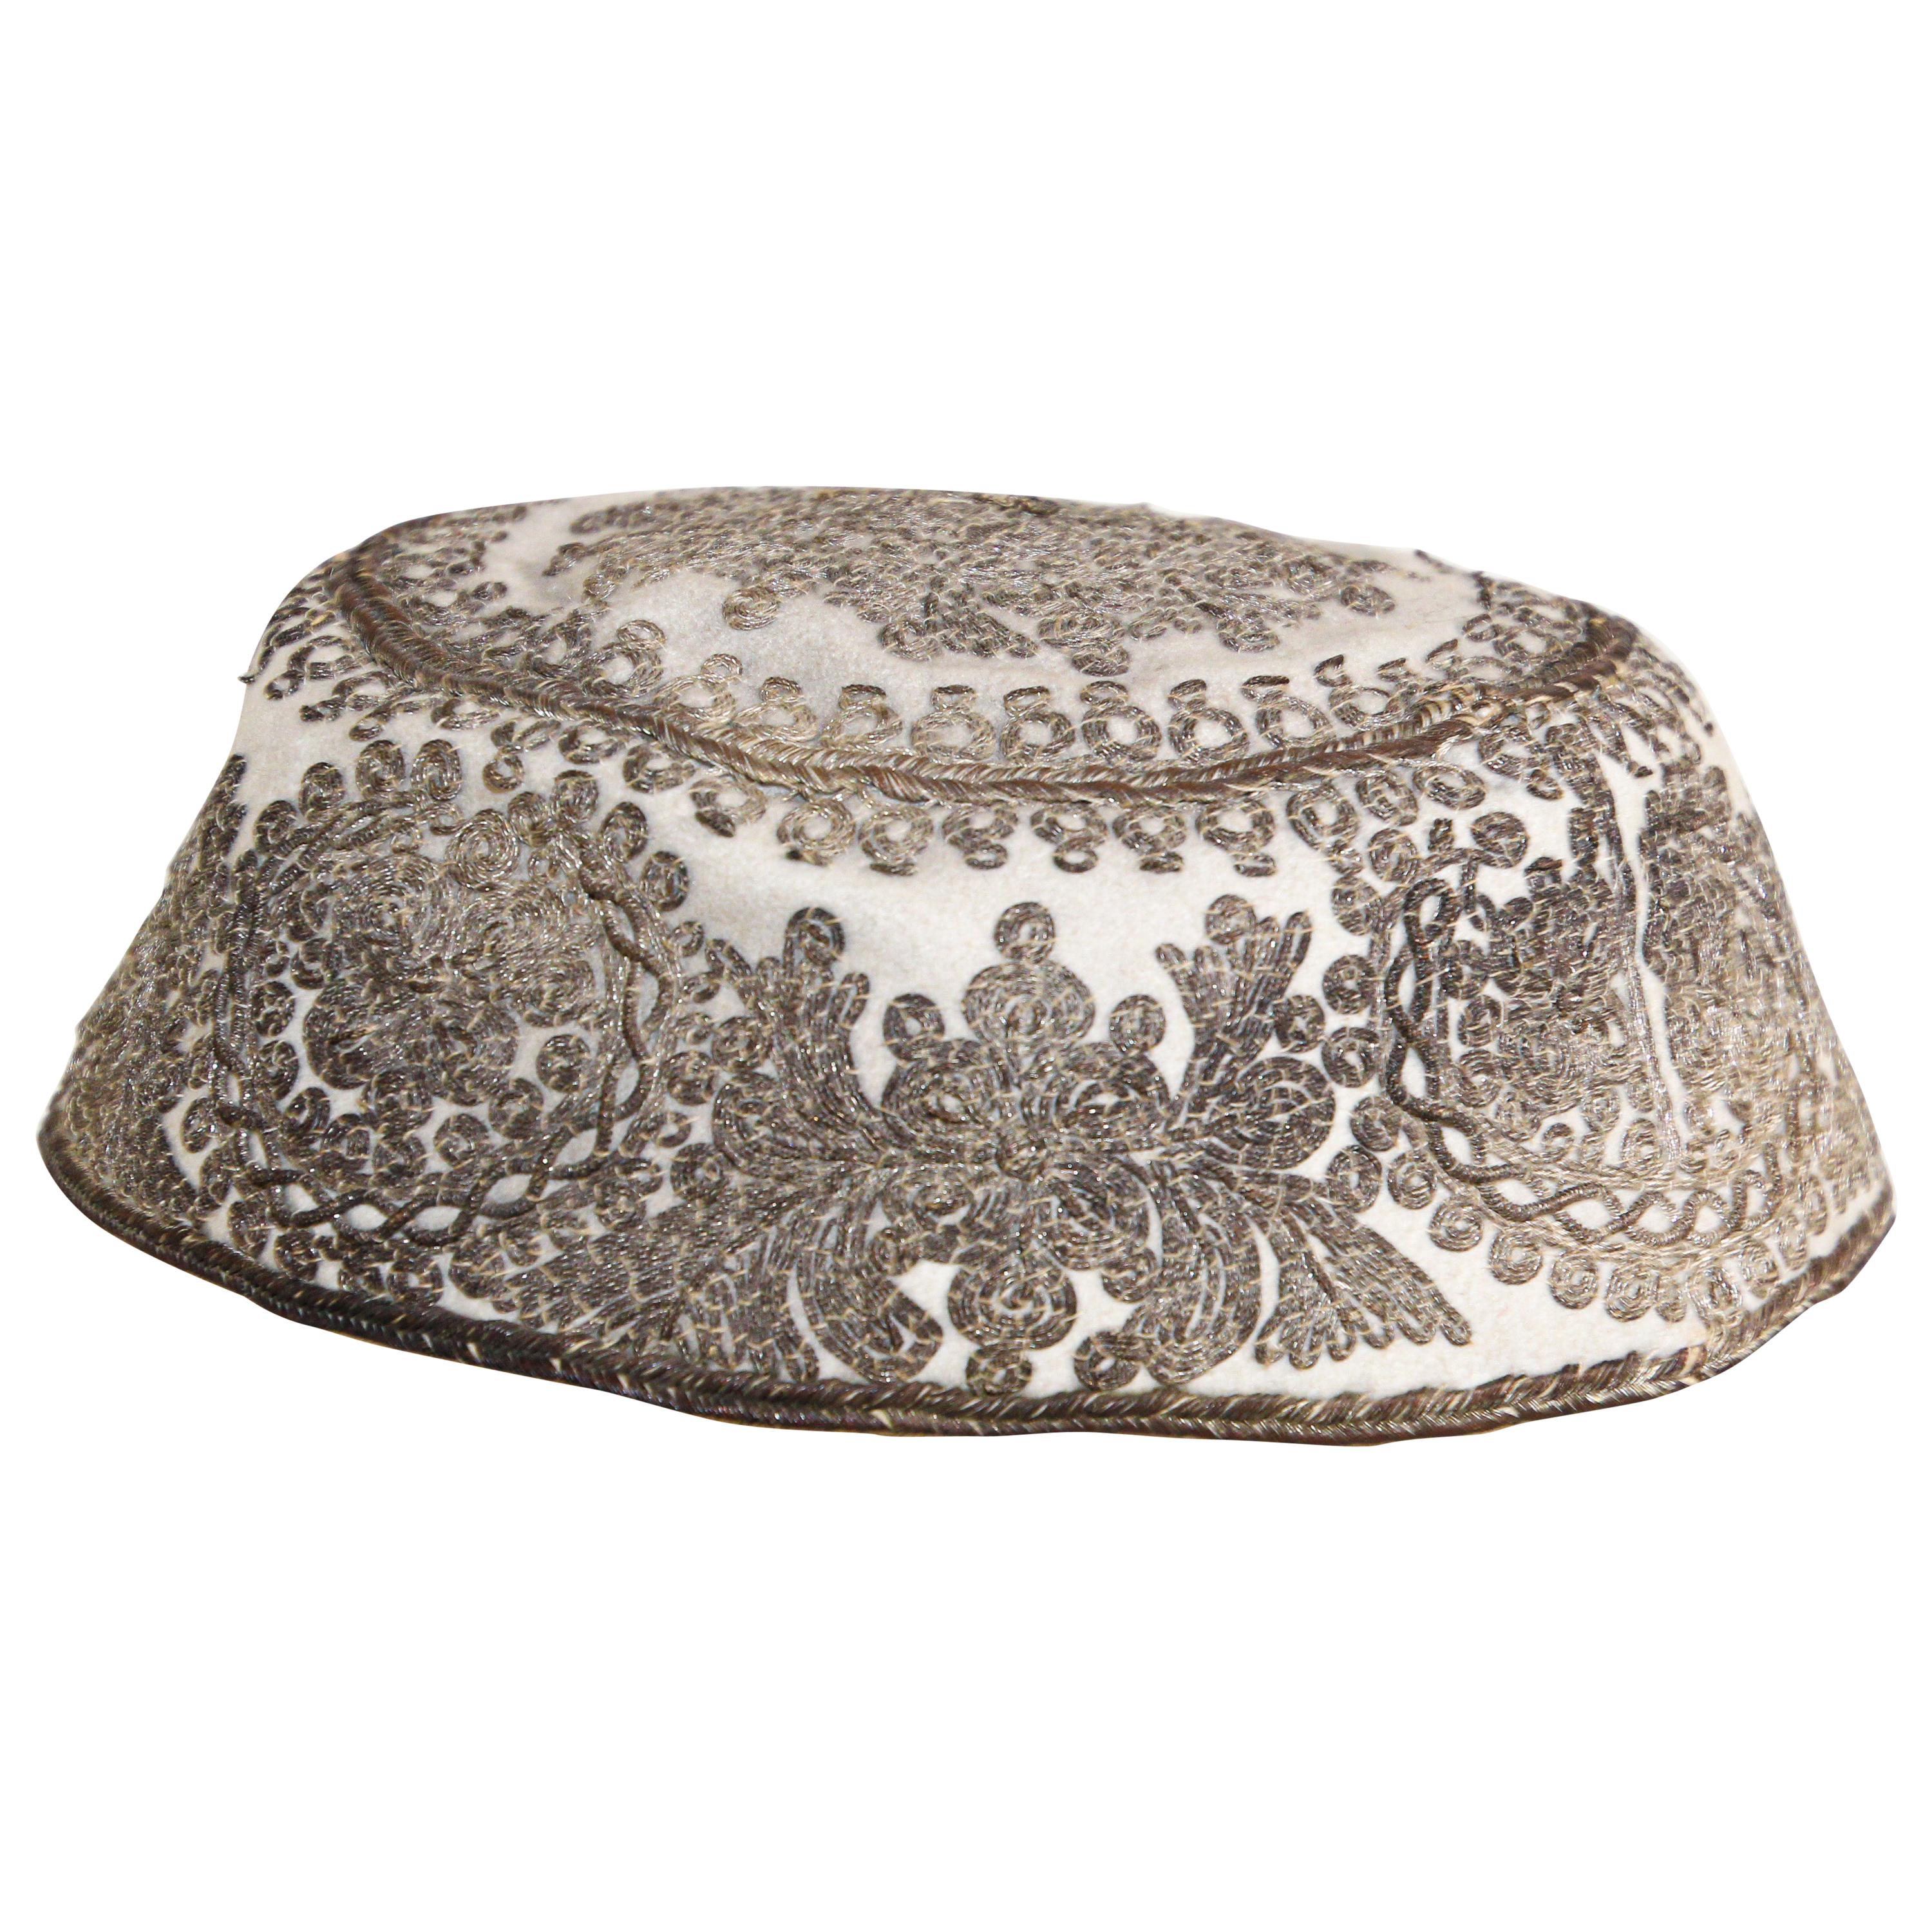 Embroidered Silver Middle Eastern Antique Hat